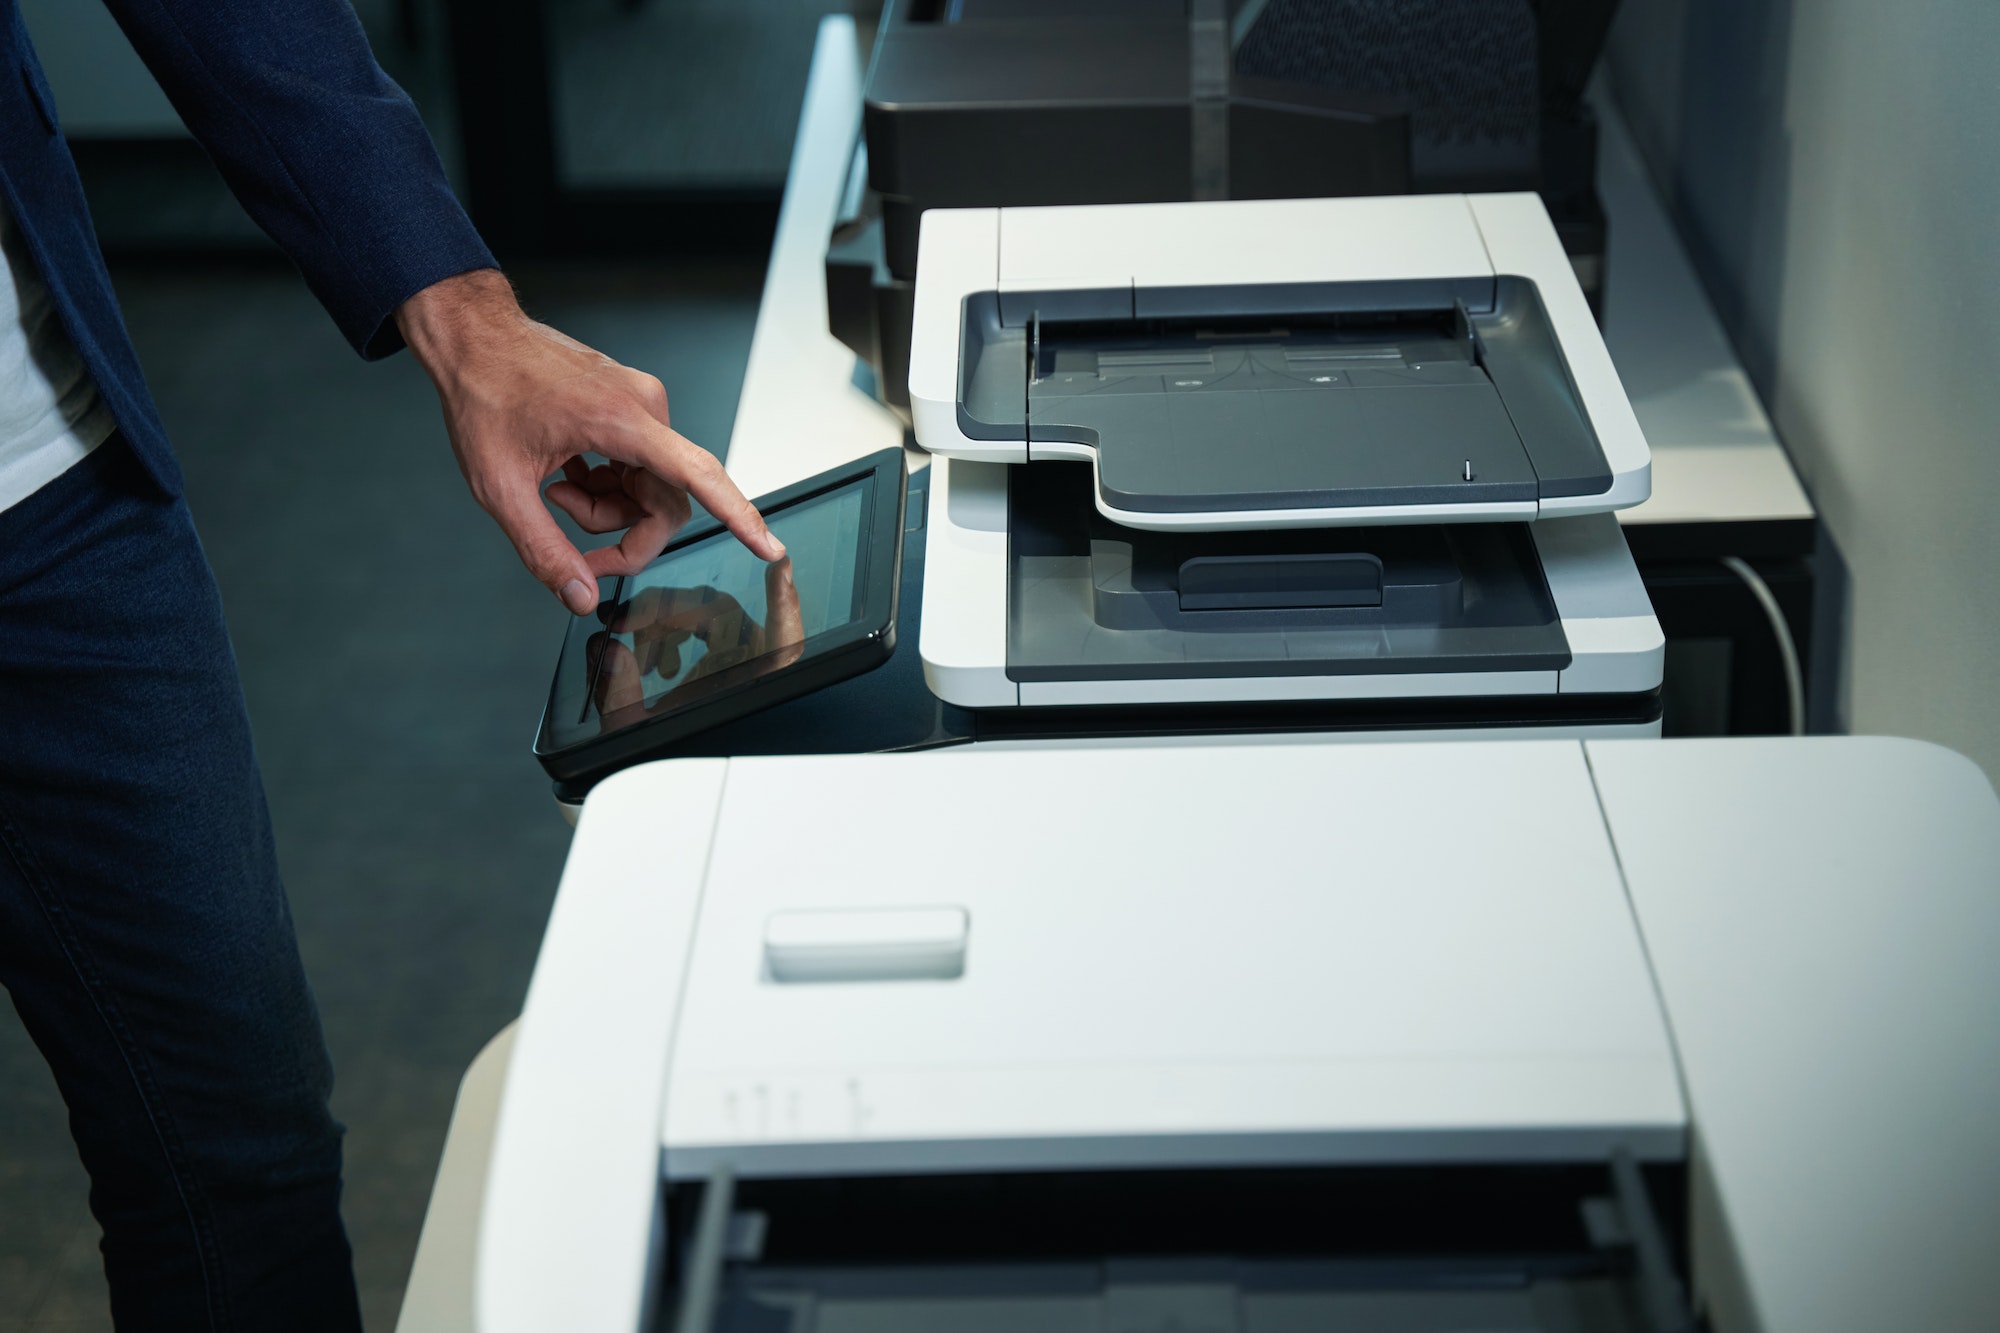 Person in office using printer and pressing on its screen